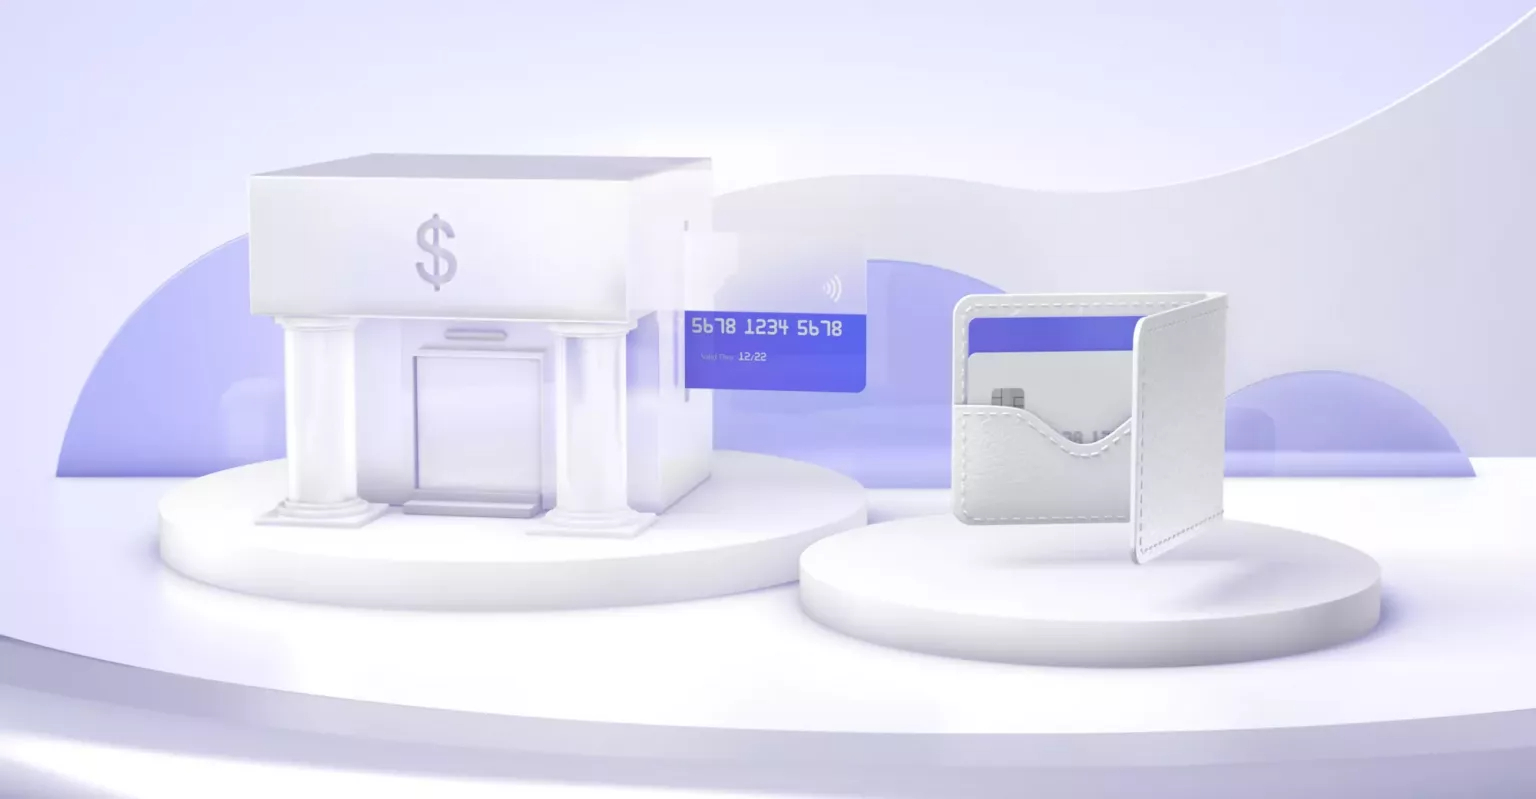 image of an Issuing bank, a credit card and a wallet